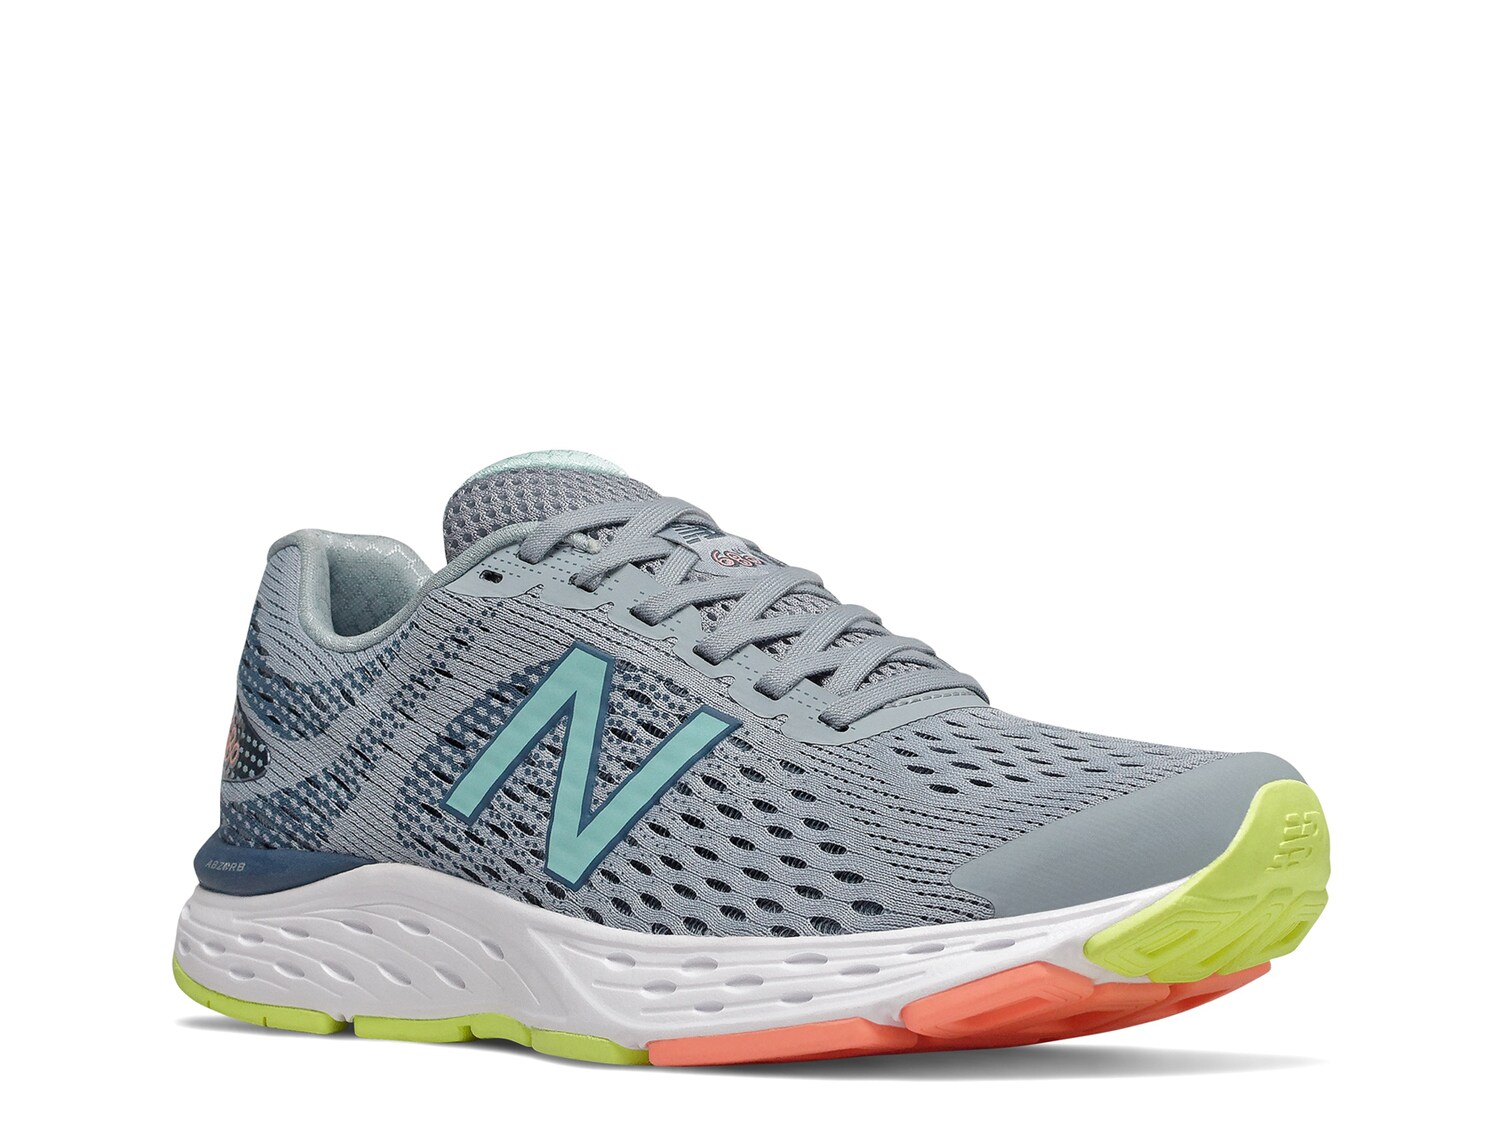 Absay drunk Majestic New Balance 680 v6 Running Shoe - Women's - Free Shipping | DSW